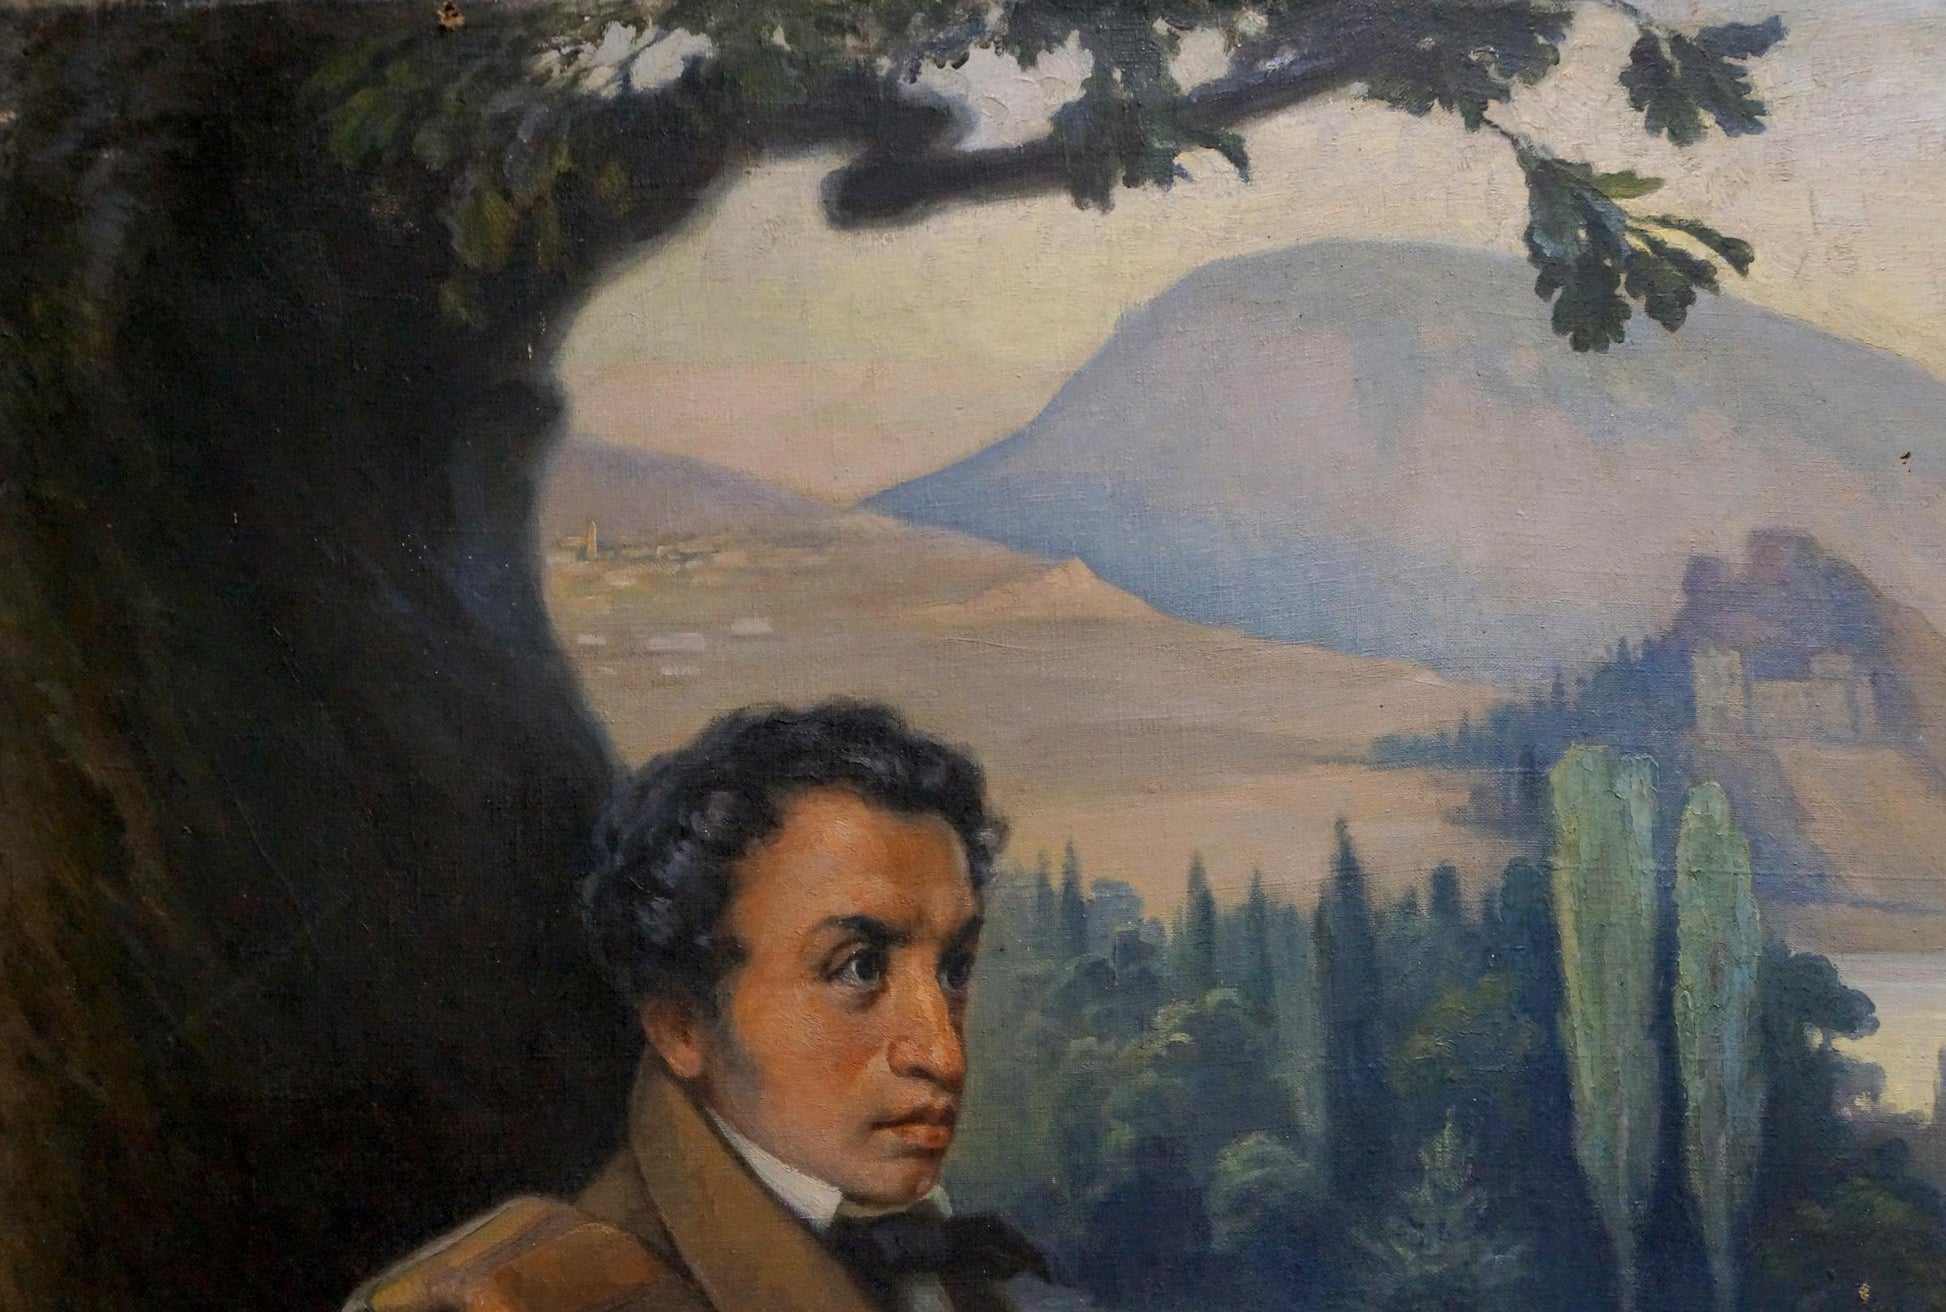 Pushkin on Vacation, an oil painting